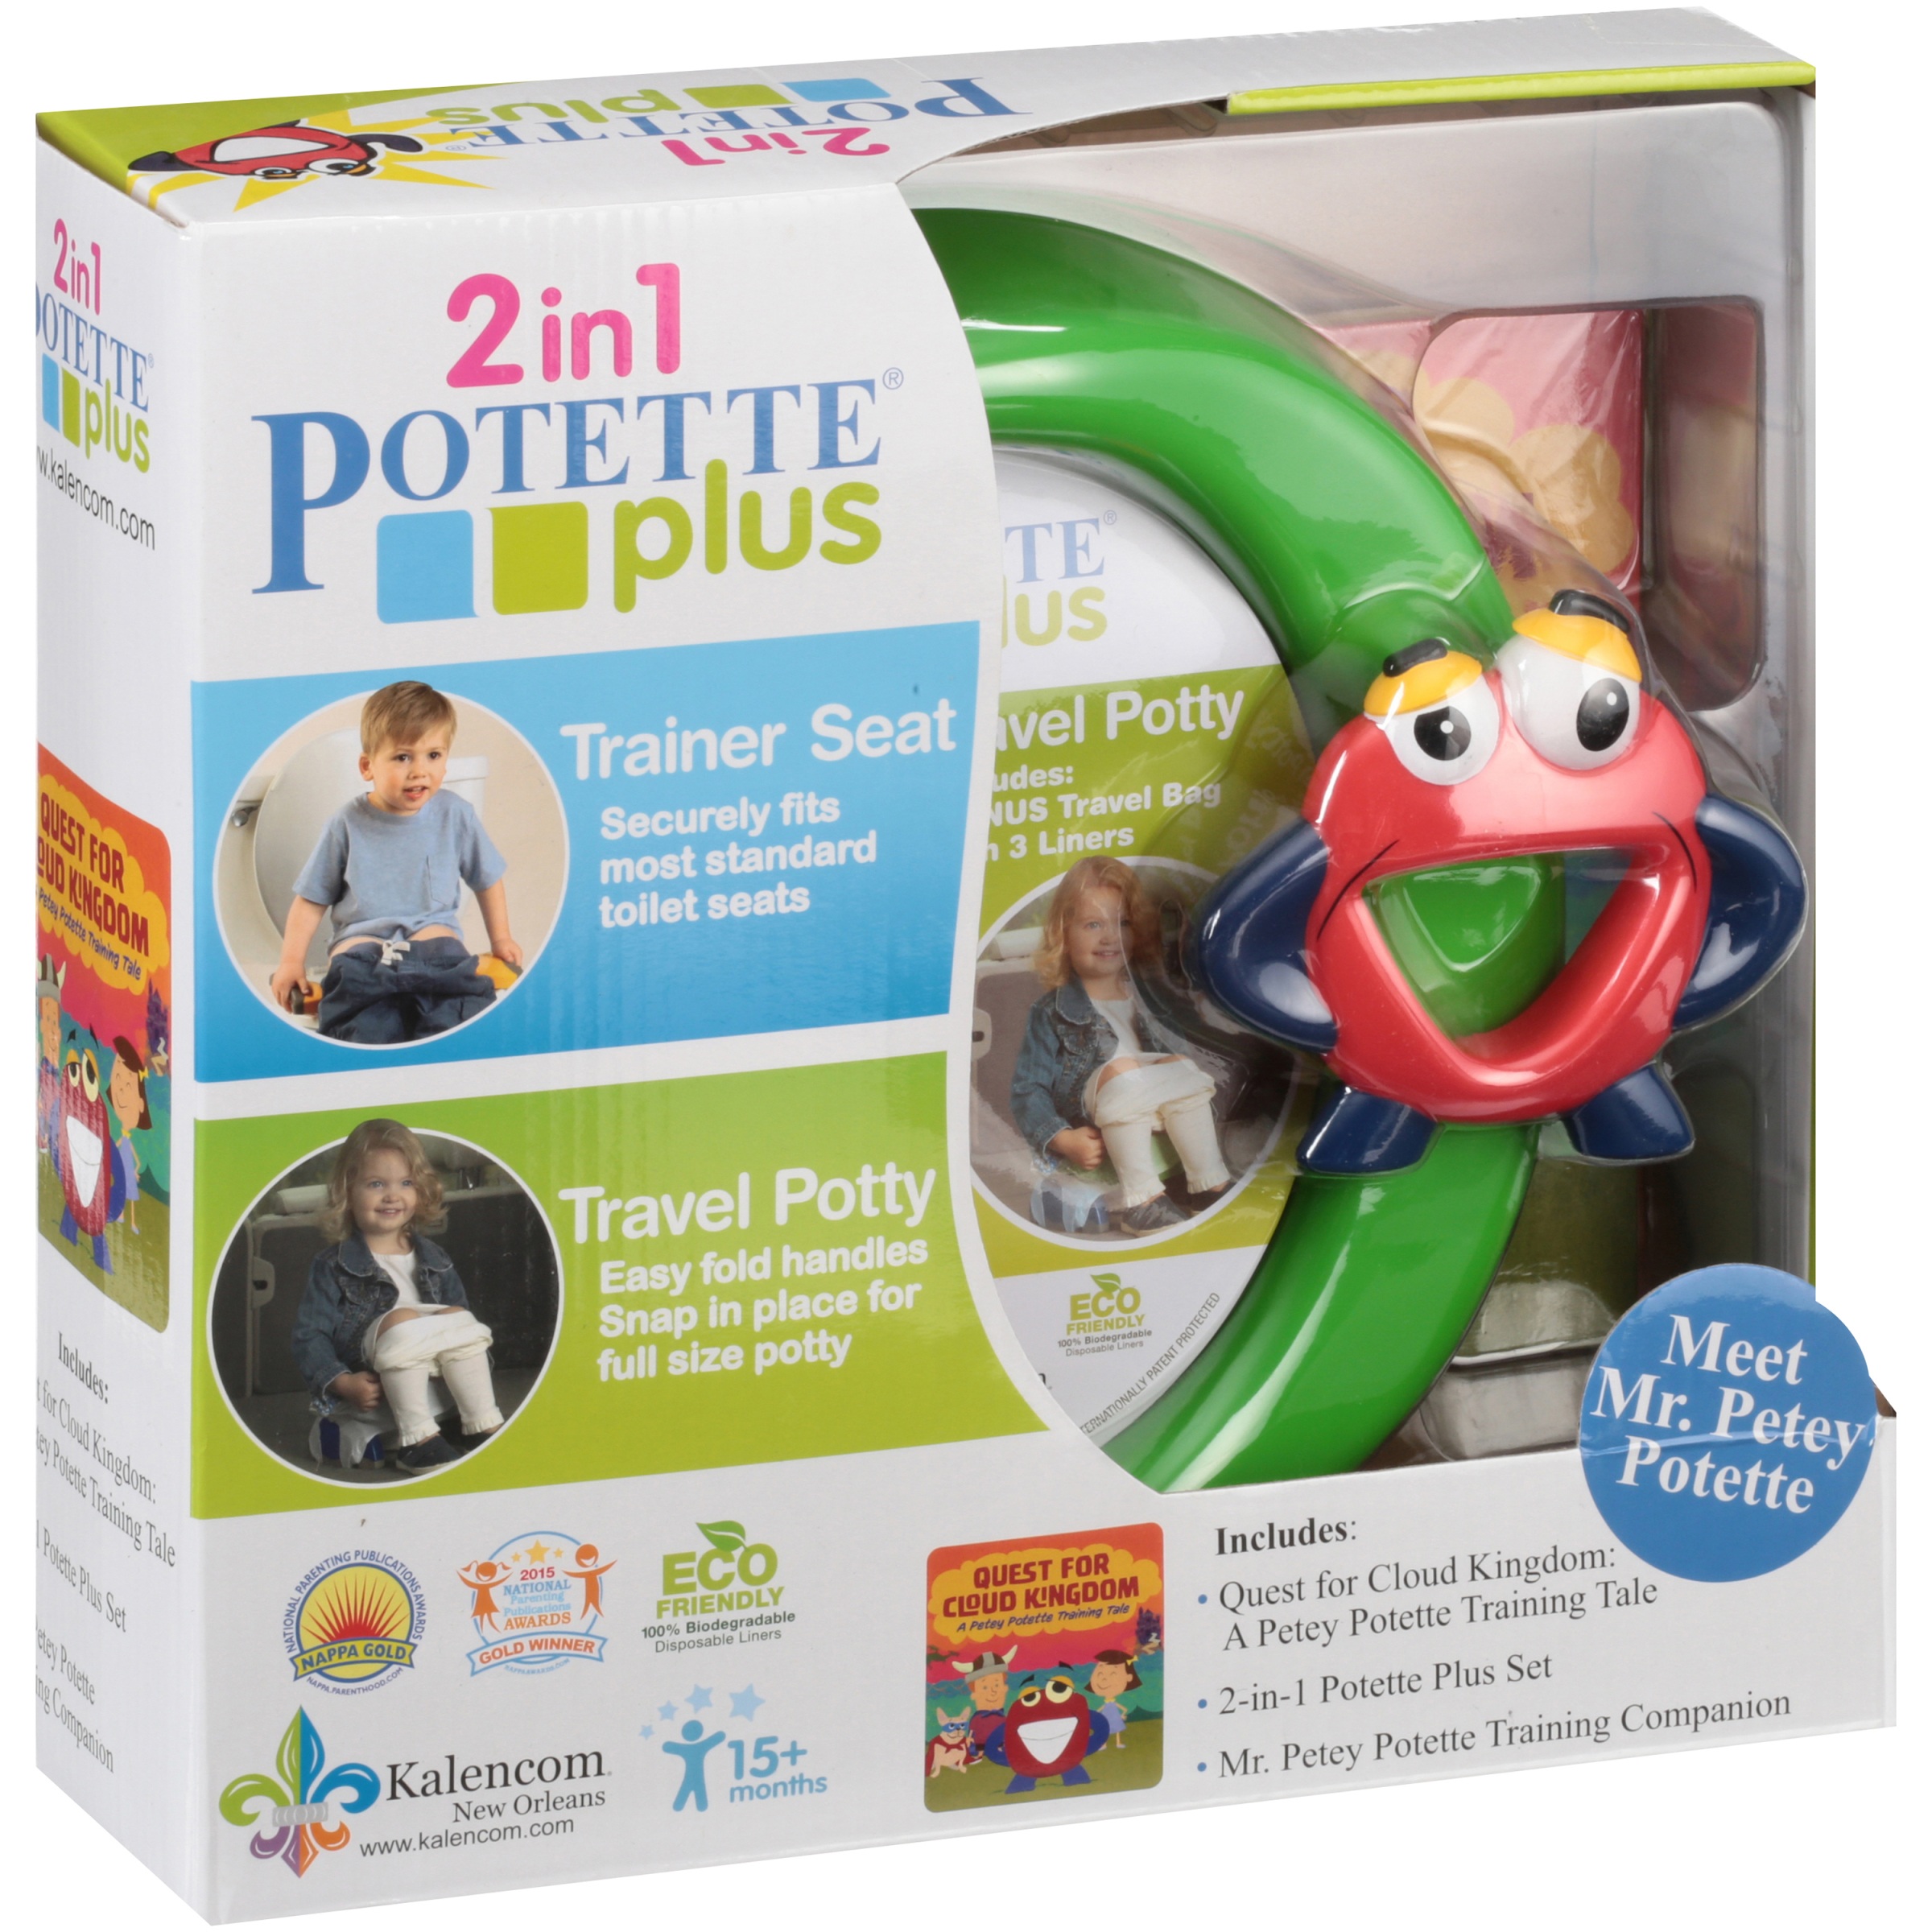 Mr. Petey Potette 2-in-1 Potty Training Kit in Green - image 2 of 4